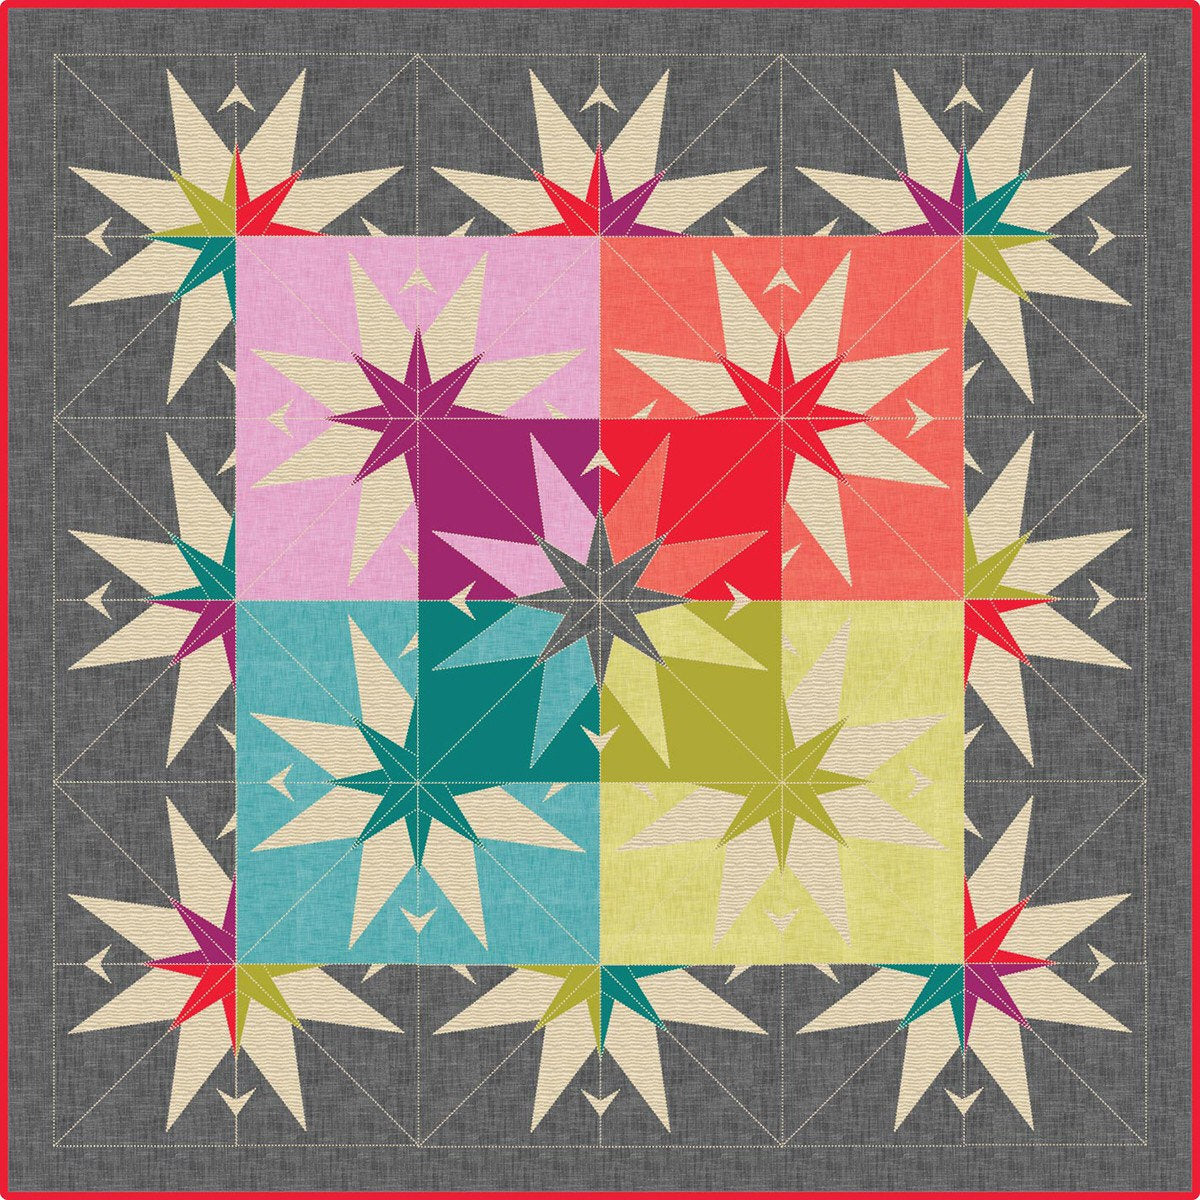 The County Star Barn Quilt Pattern - Violet Craft - Foundation Paper Piecing